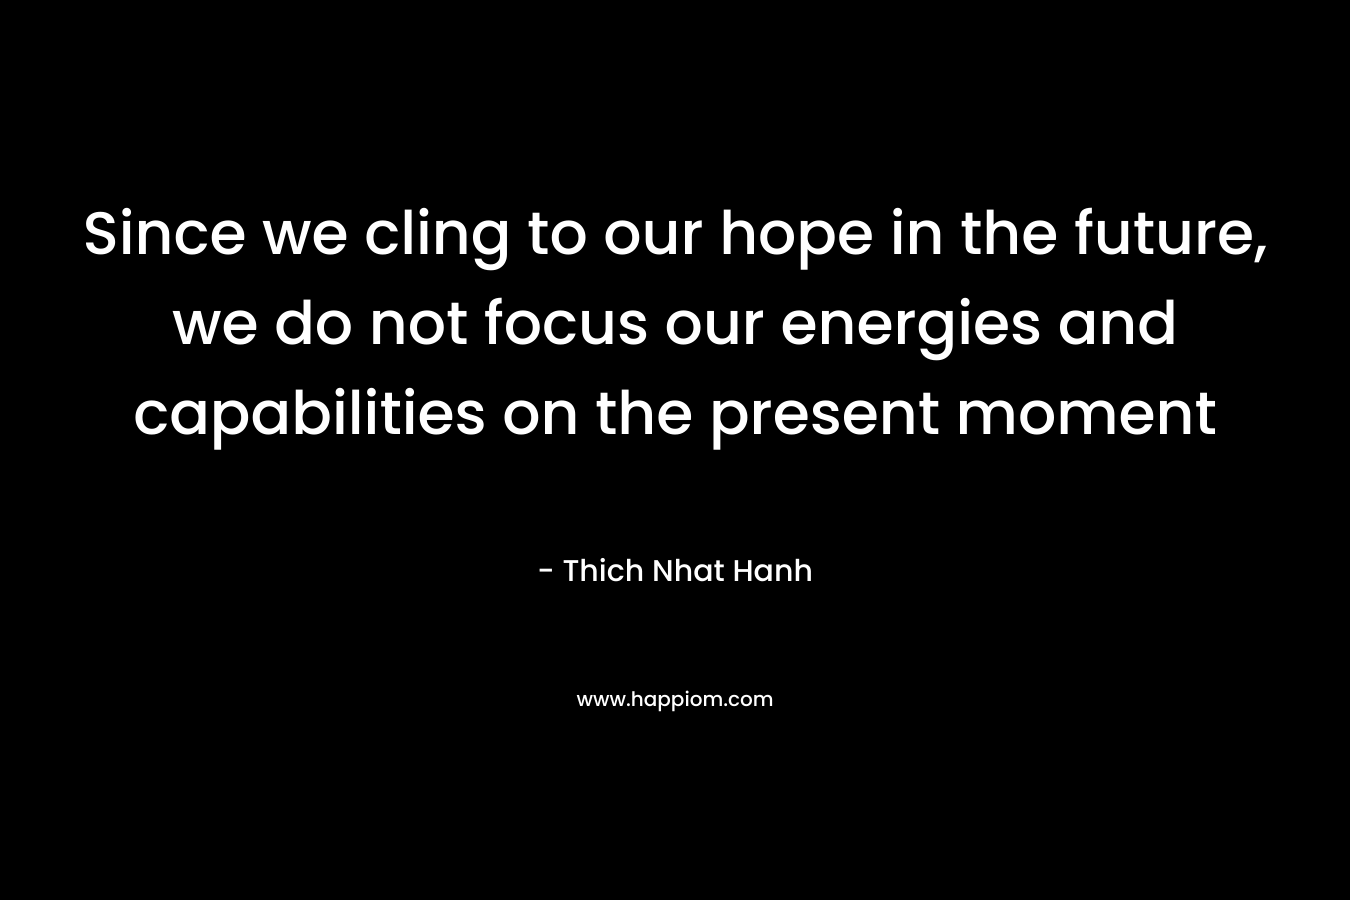 Since we cling to our hope in the future, we do not focus our energies and capabilities on the present moment – Thich Nhat Hanh